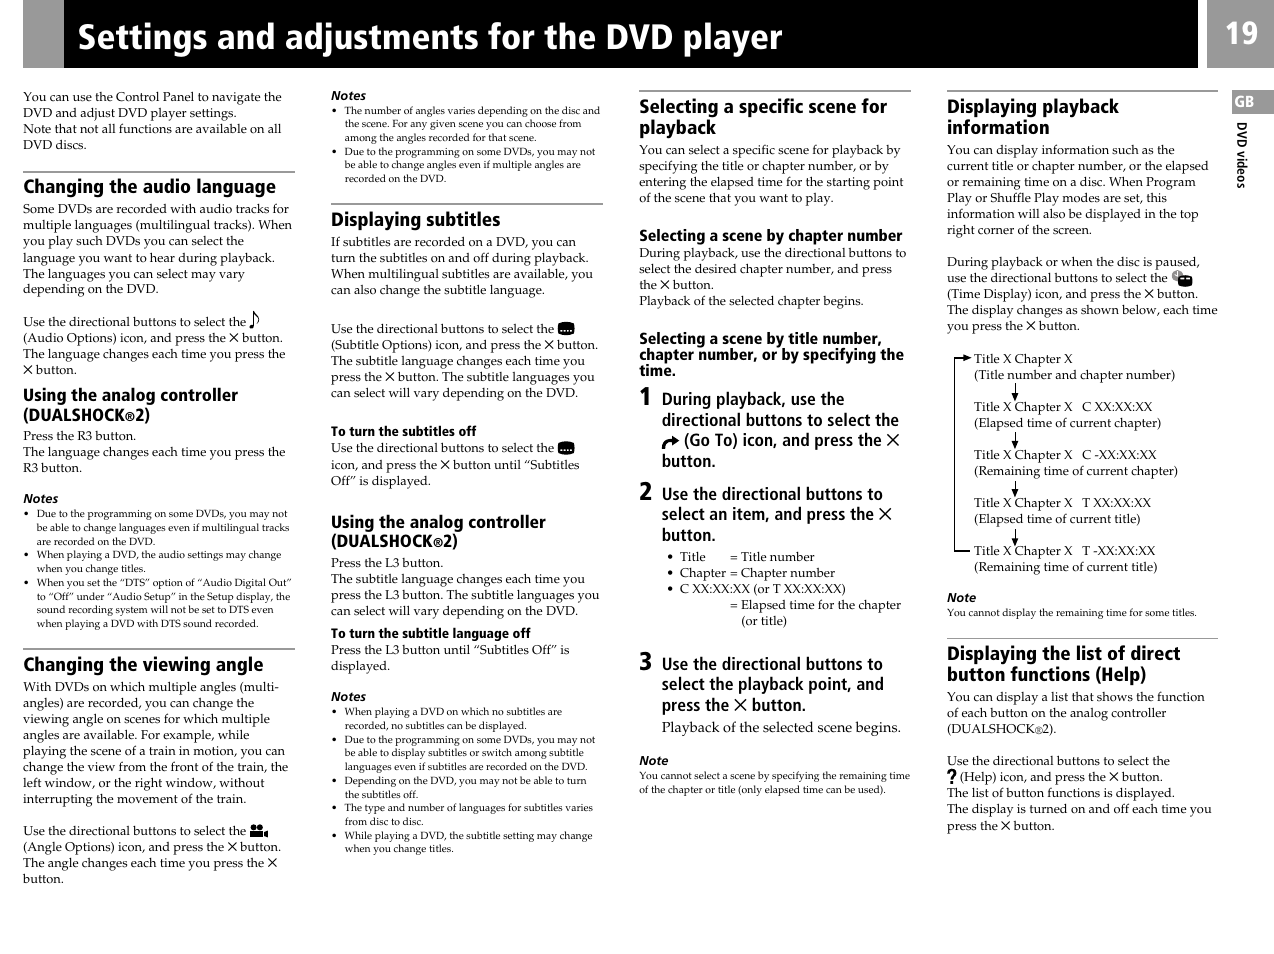 Settings and adjustments for the dvd player, Changing the audio language, Changing the viewing angle | Displaying subtitles, Selecting a specific scene for playback, Displaying playback information | Sony SCPH-50006 User Manual | Page 19 / 56